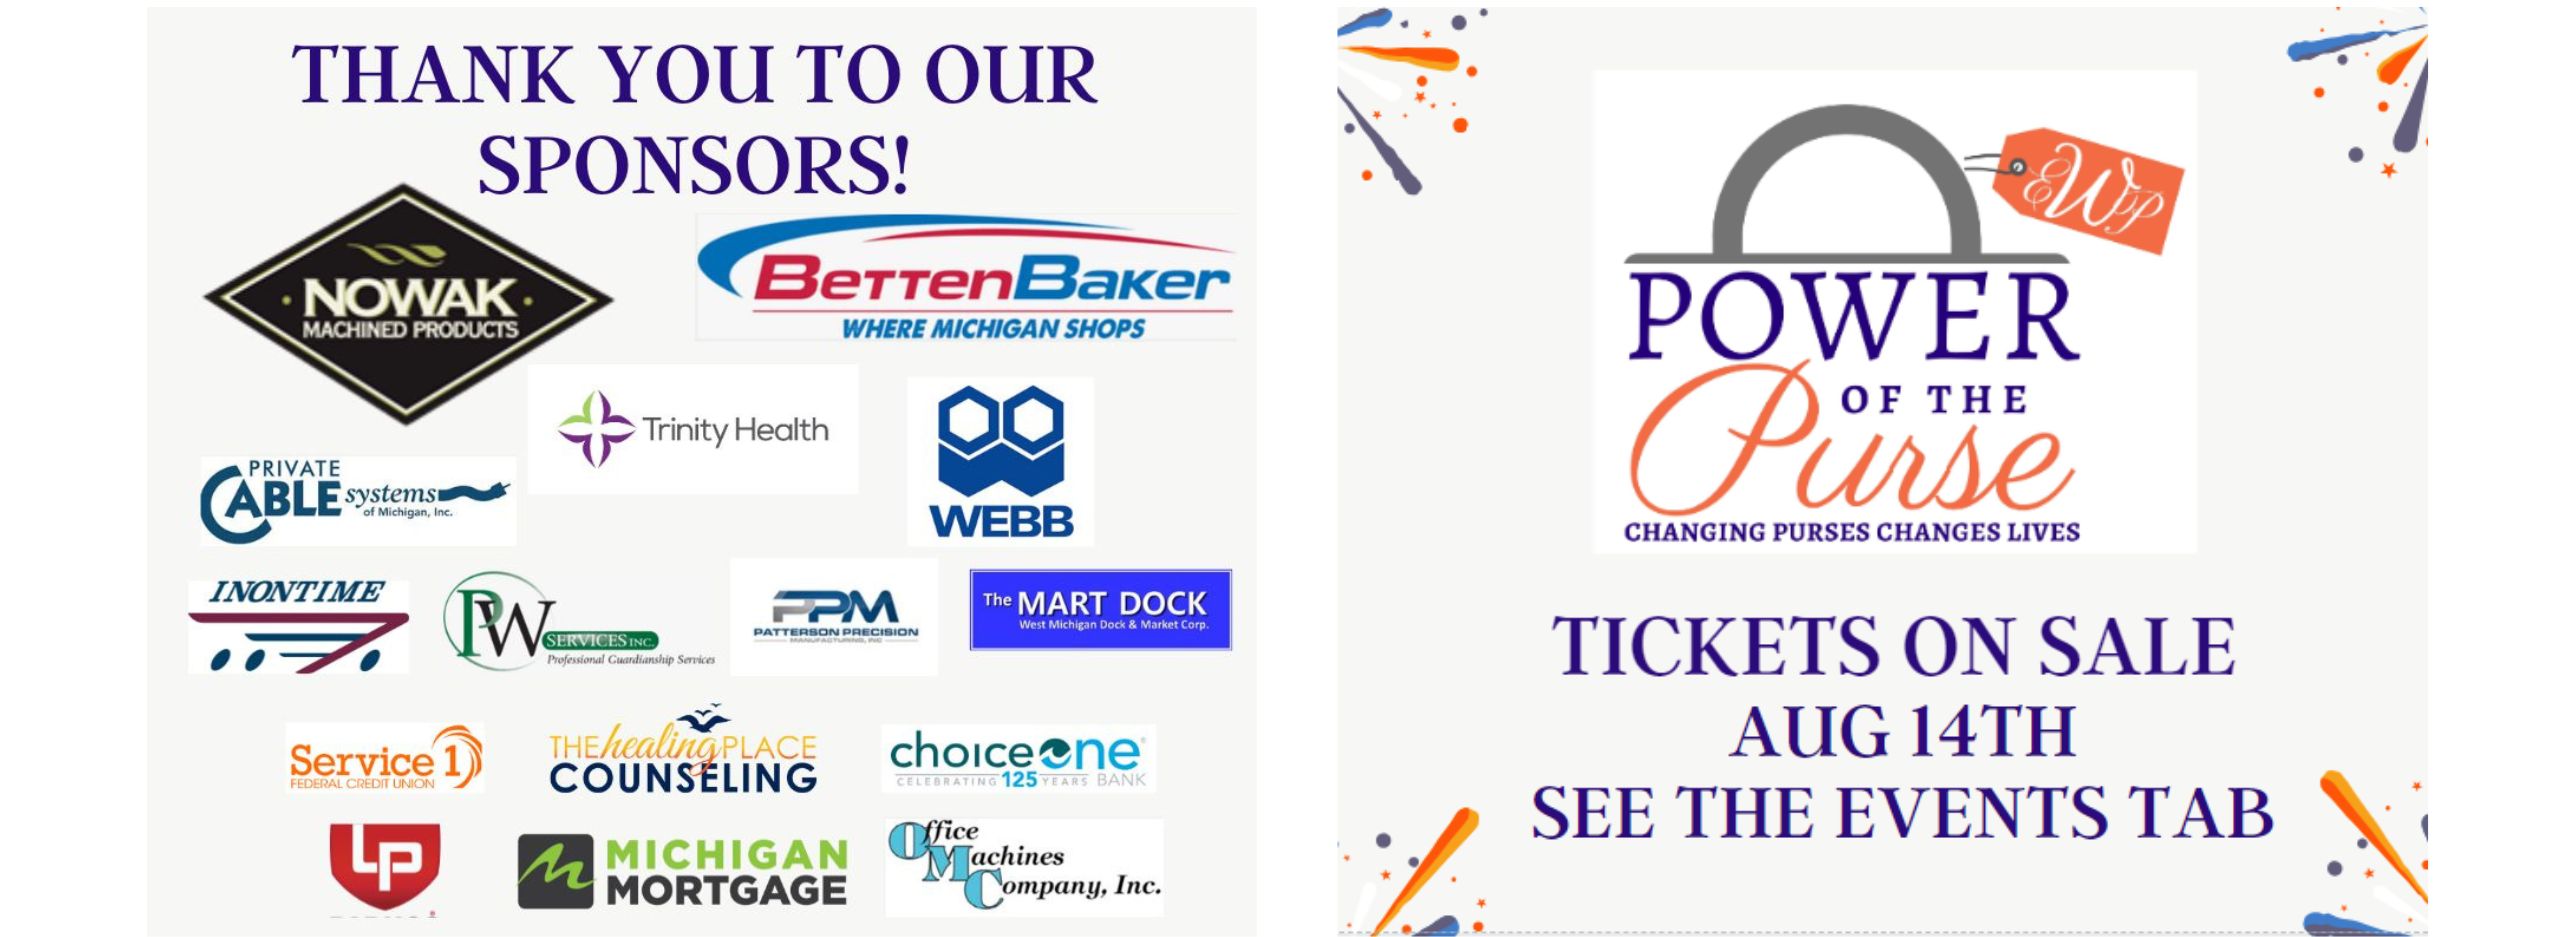 Sponsorship Banner for Power of the Purse Event